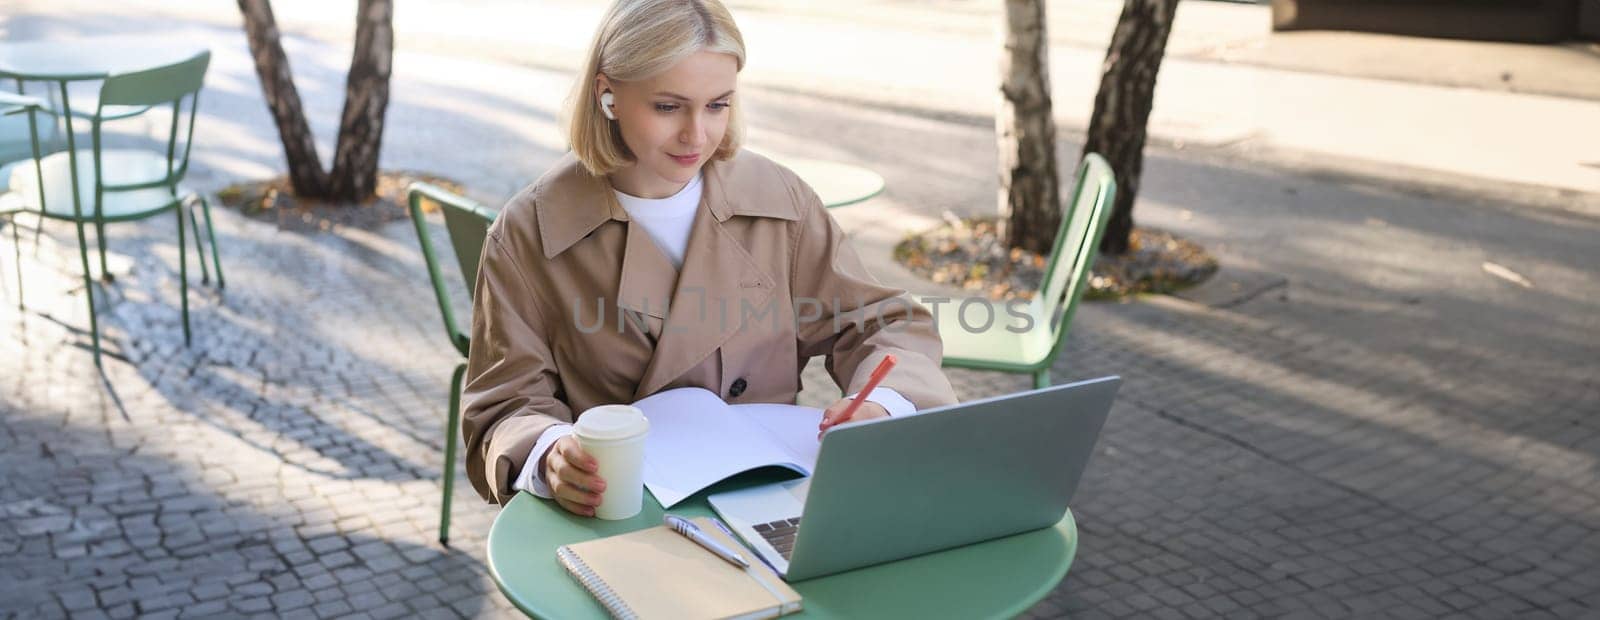 Portrait of beautiful blond woman, wearing wireless headphones, using laptop, studying in outdoor coffee shop, making notes, working on project.